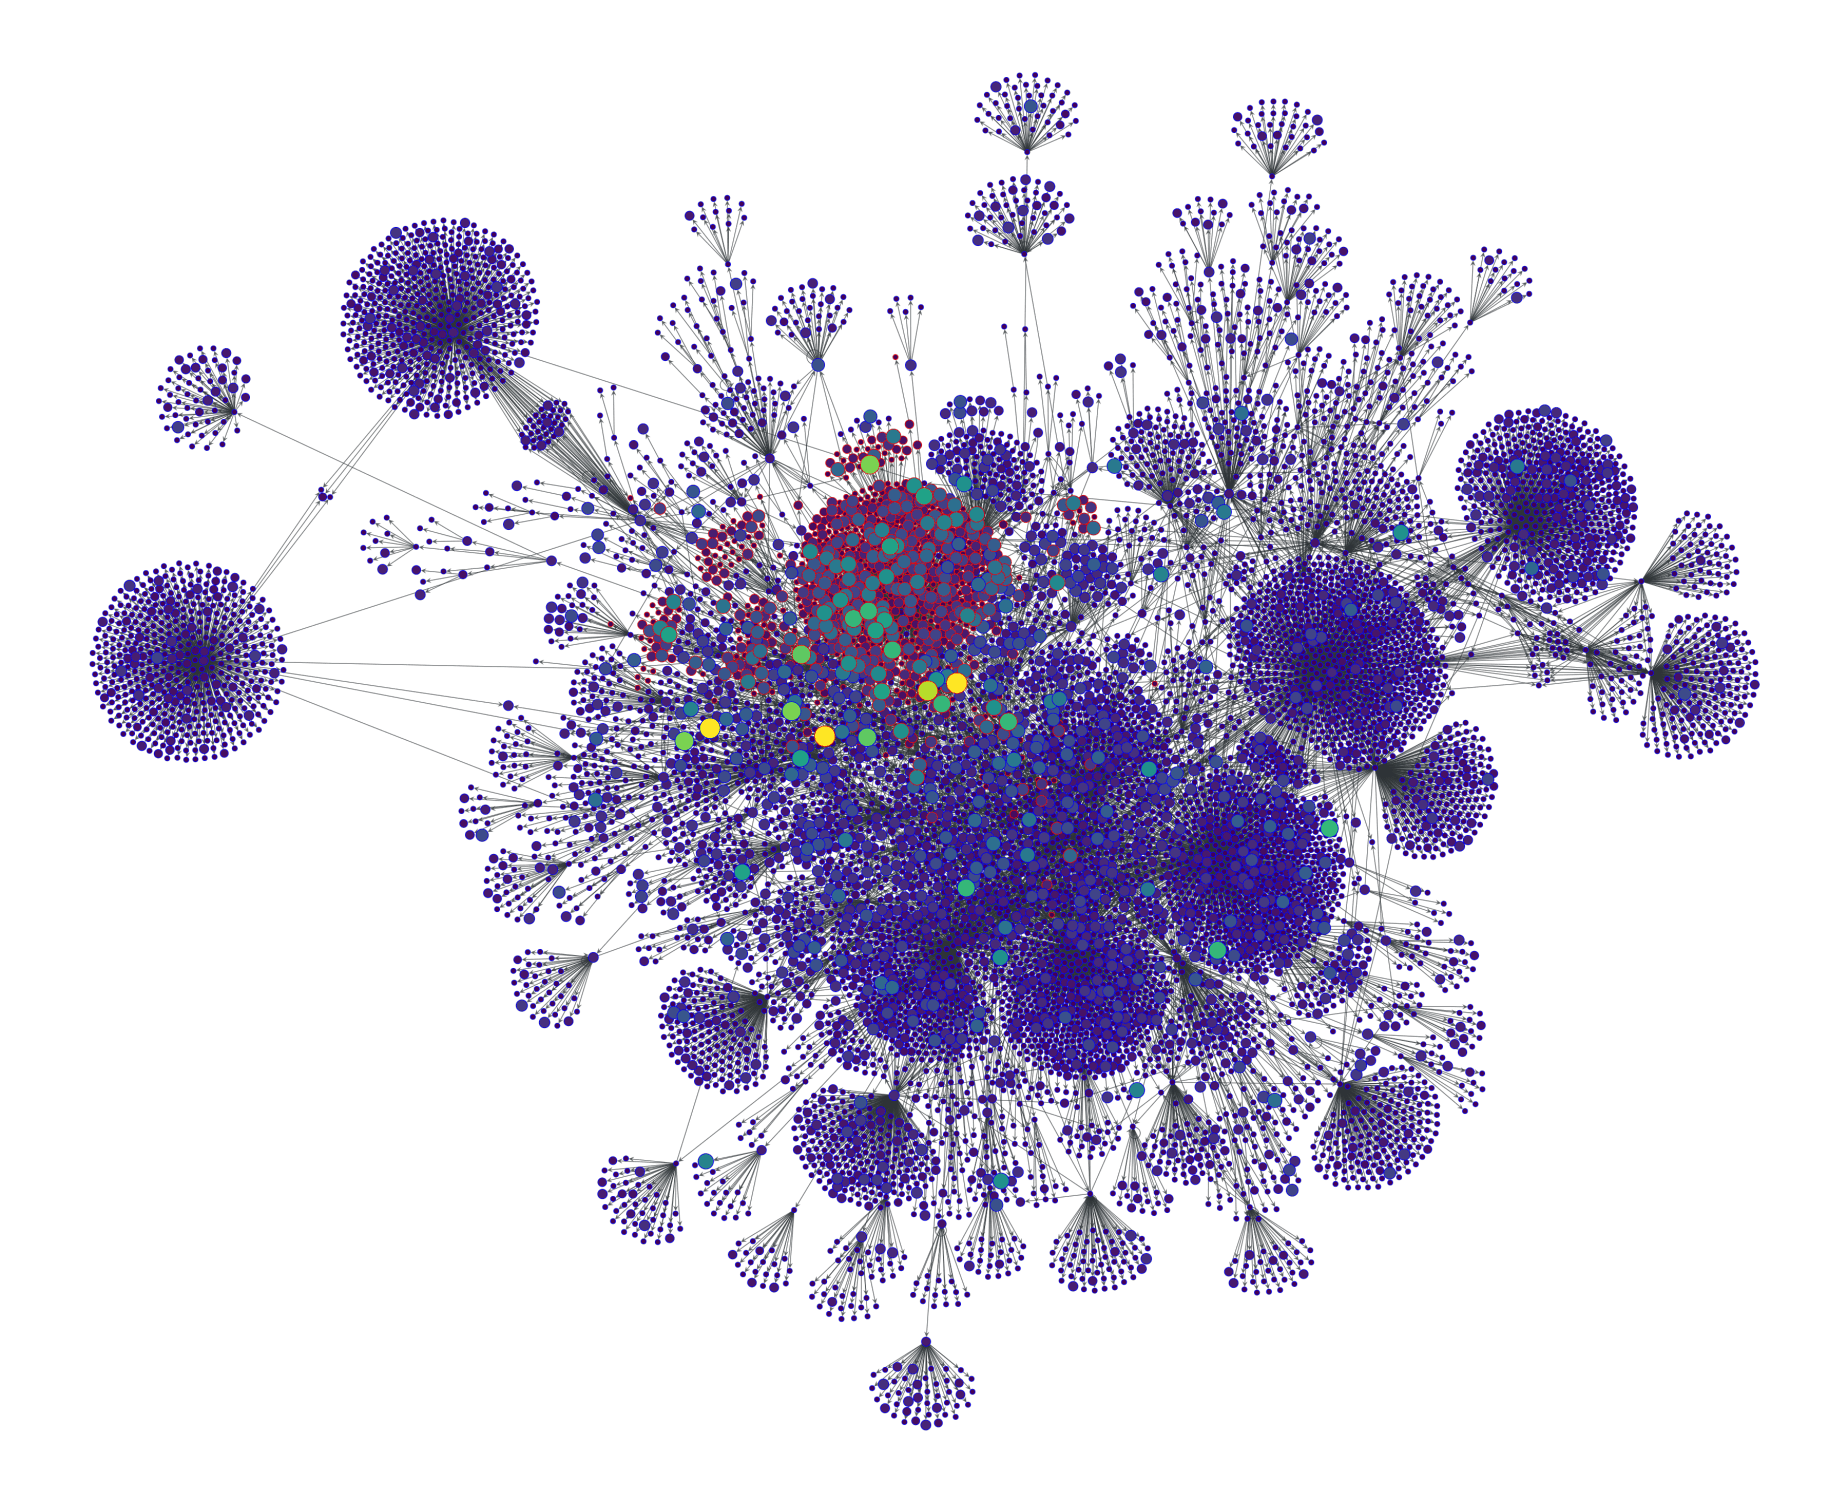 The network of all 10.000 websites together with the cluster of 865 websites, marked in red. The graph shows that websites within or near the cluster have a much higher risk of fake news, while websites that are further away from it tend to have a lower risk.